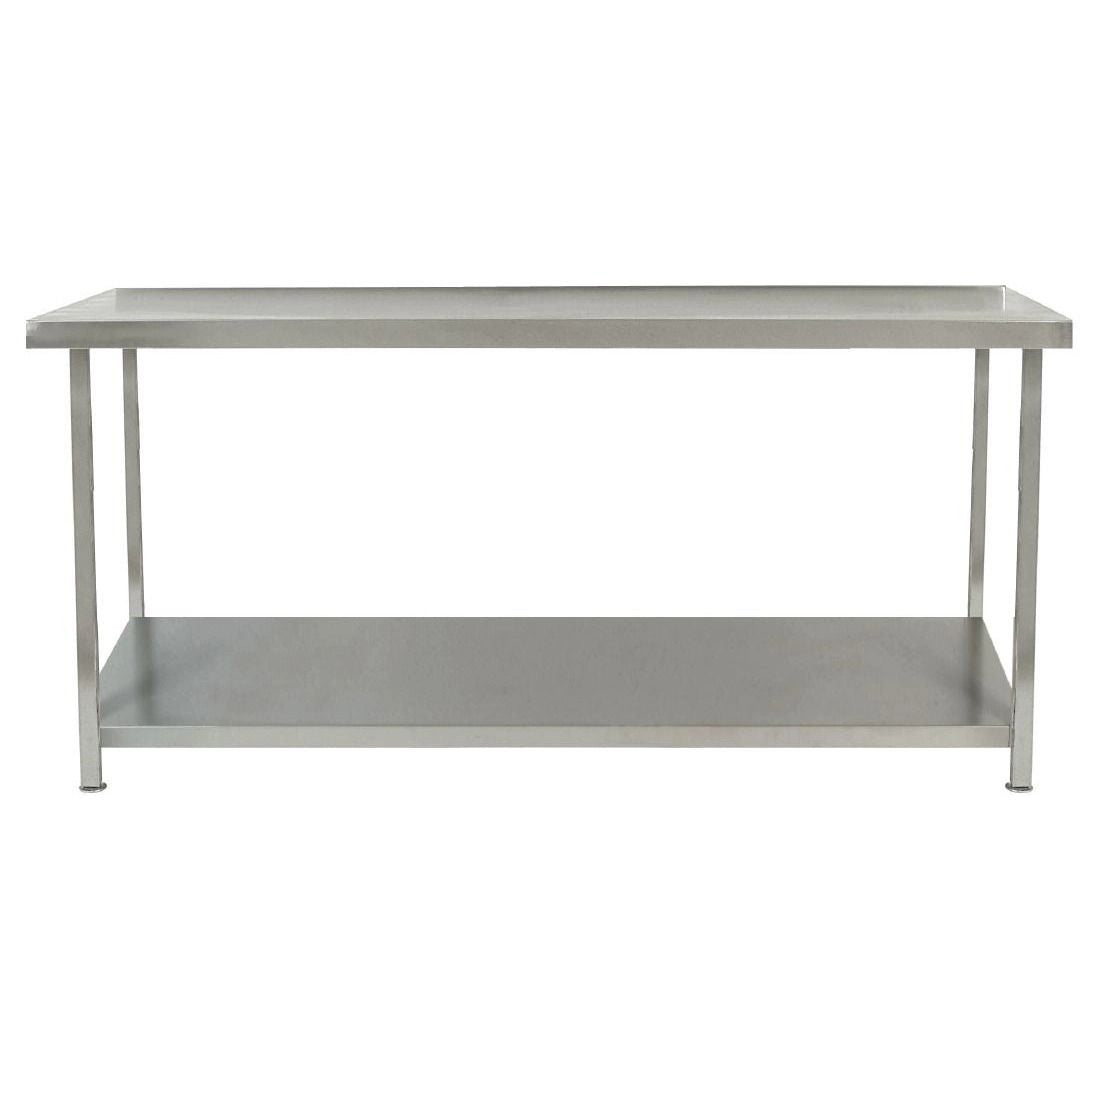 Parry Fully Welded Stainless Steel Centre Table with Undershelf 900x600mm - DC609